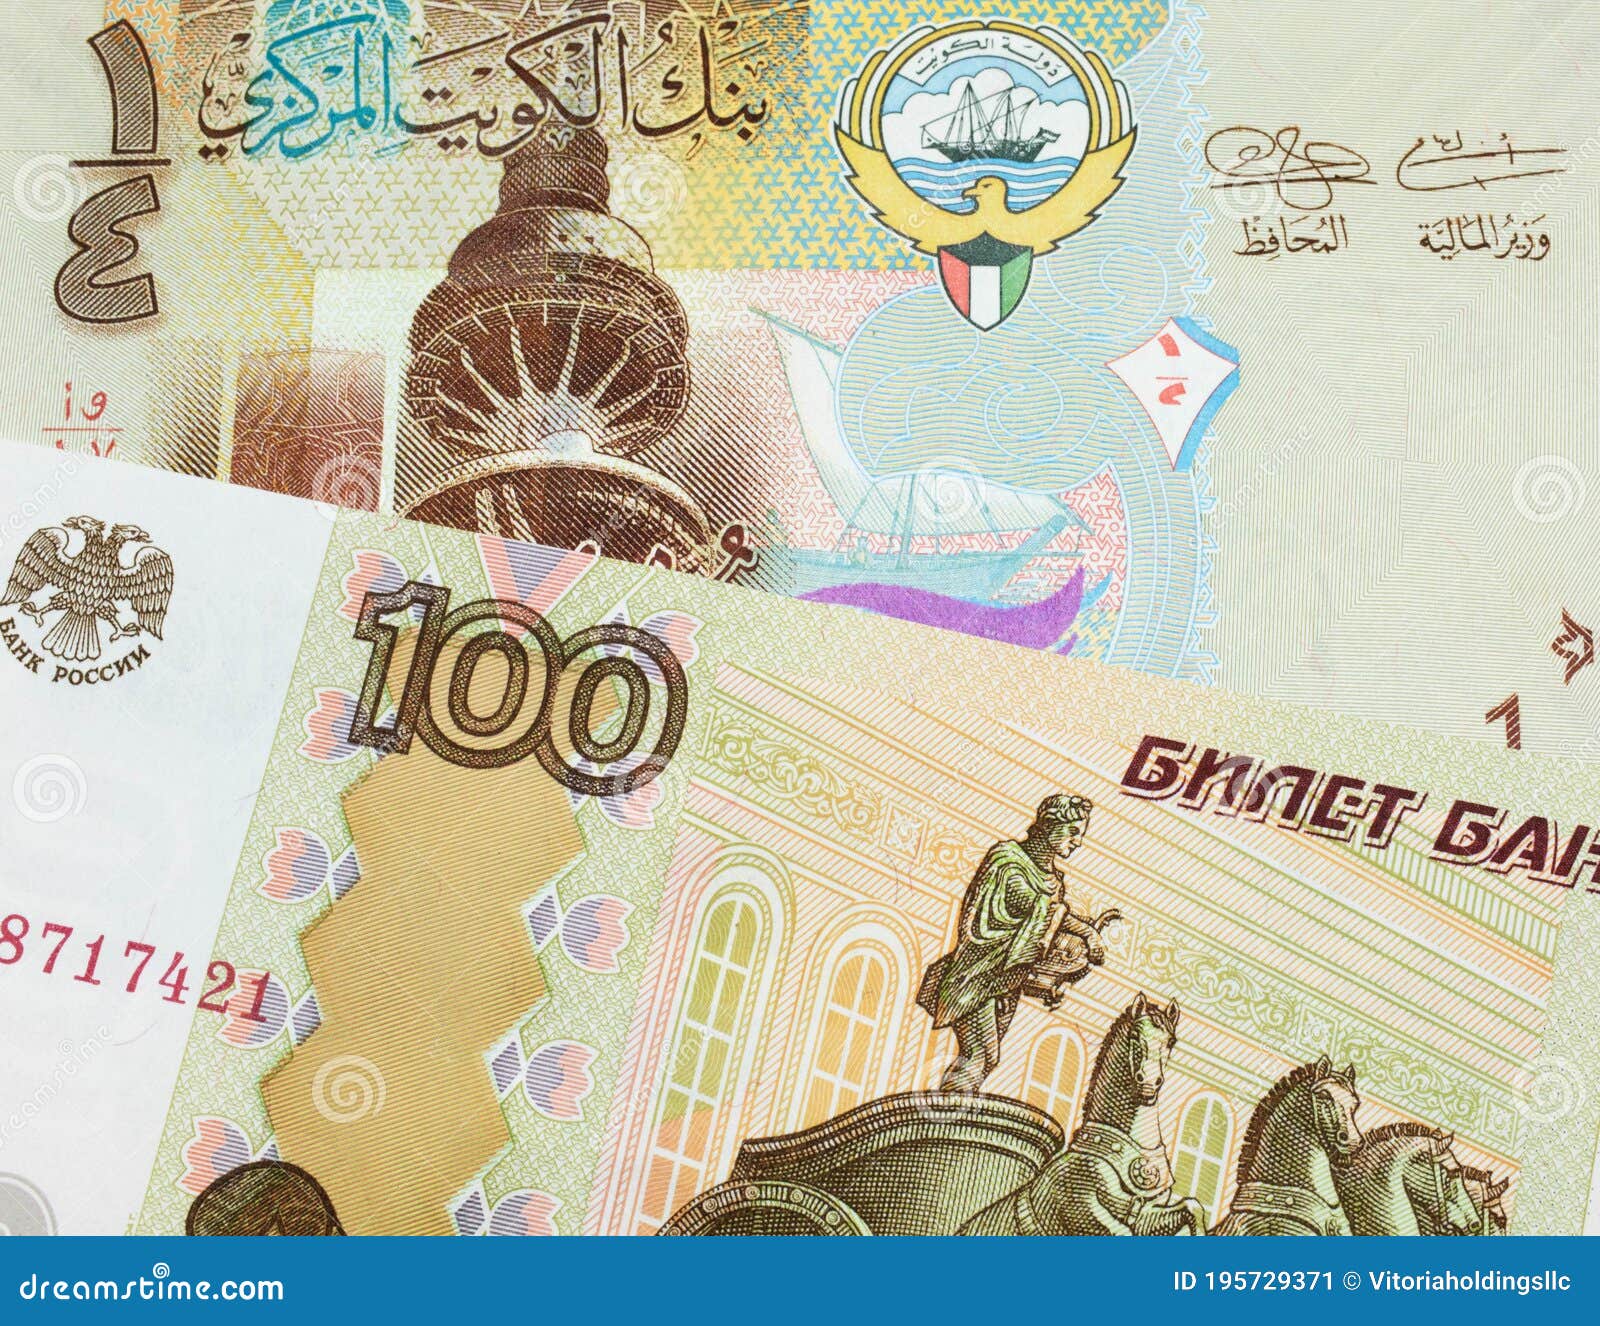 Kuwait Currency - Kuwaiti Dinar Second Issue #Collectors # Kuwait #Banknote #Hobby #Dinar